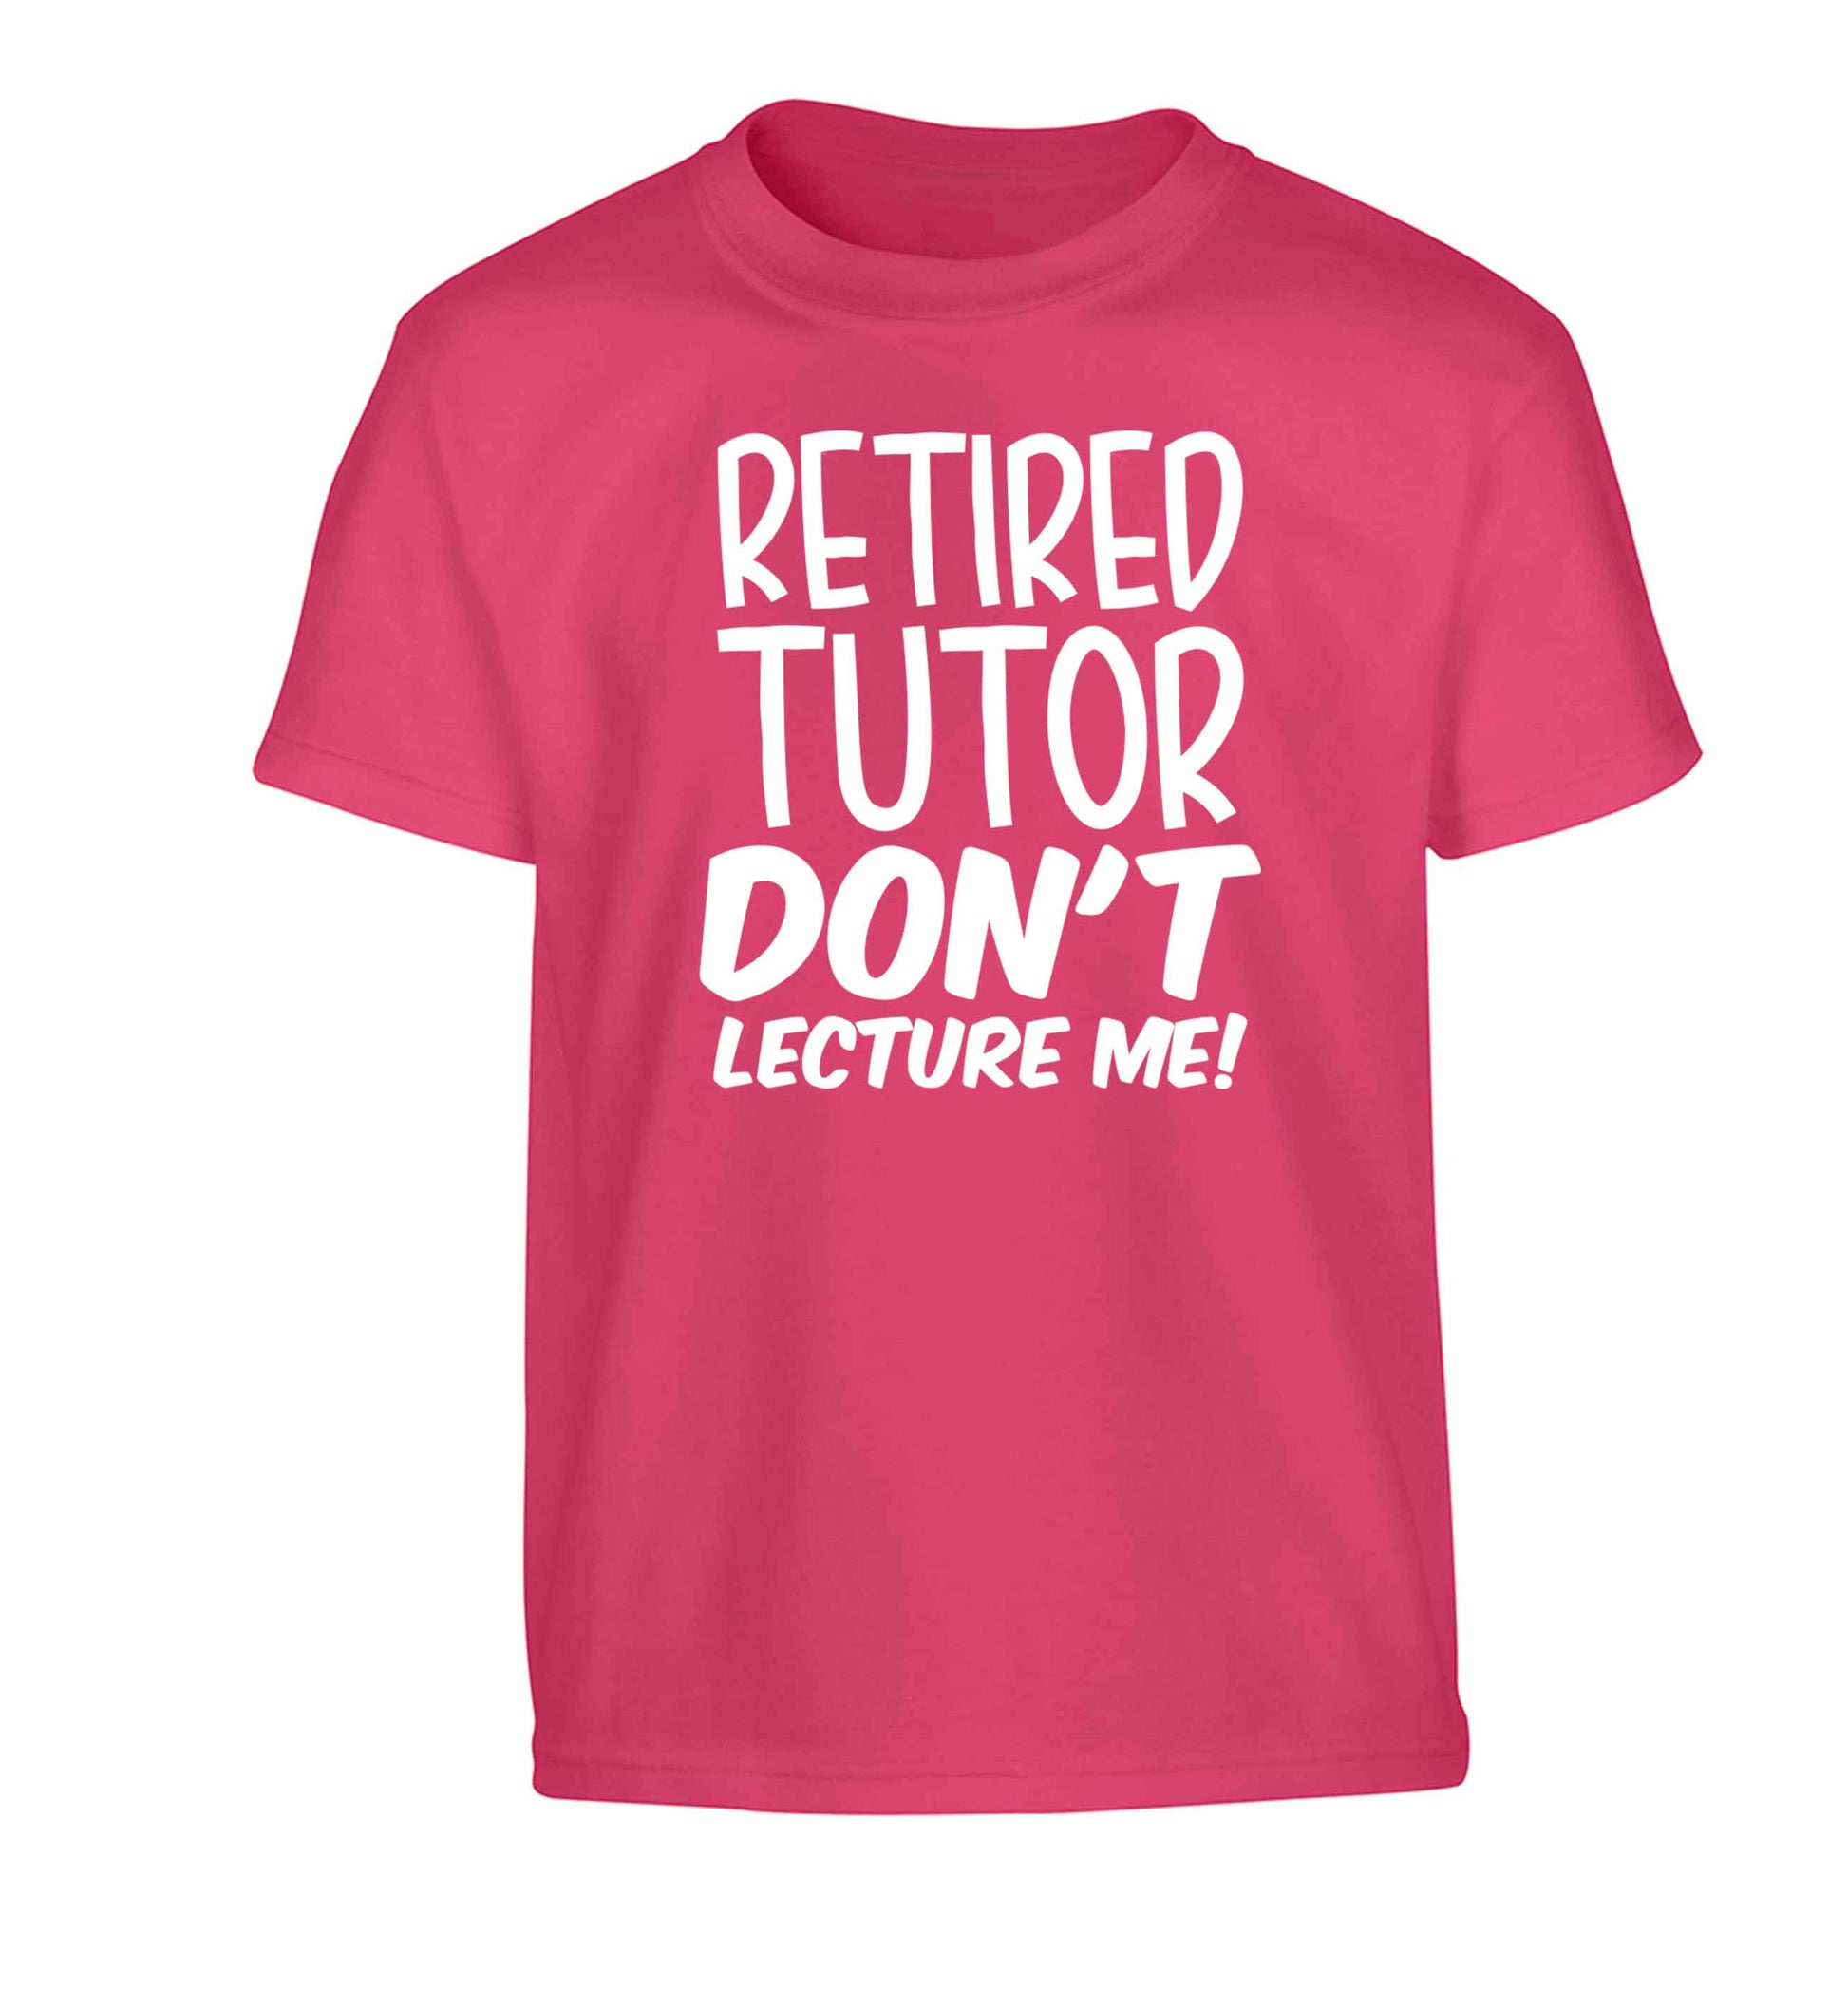 Retired tutor don't lecture me! Children's pink Tshirt 12-13 Years